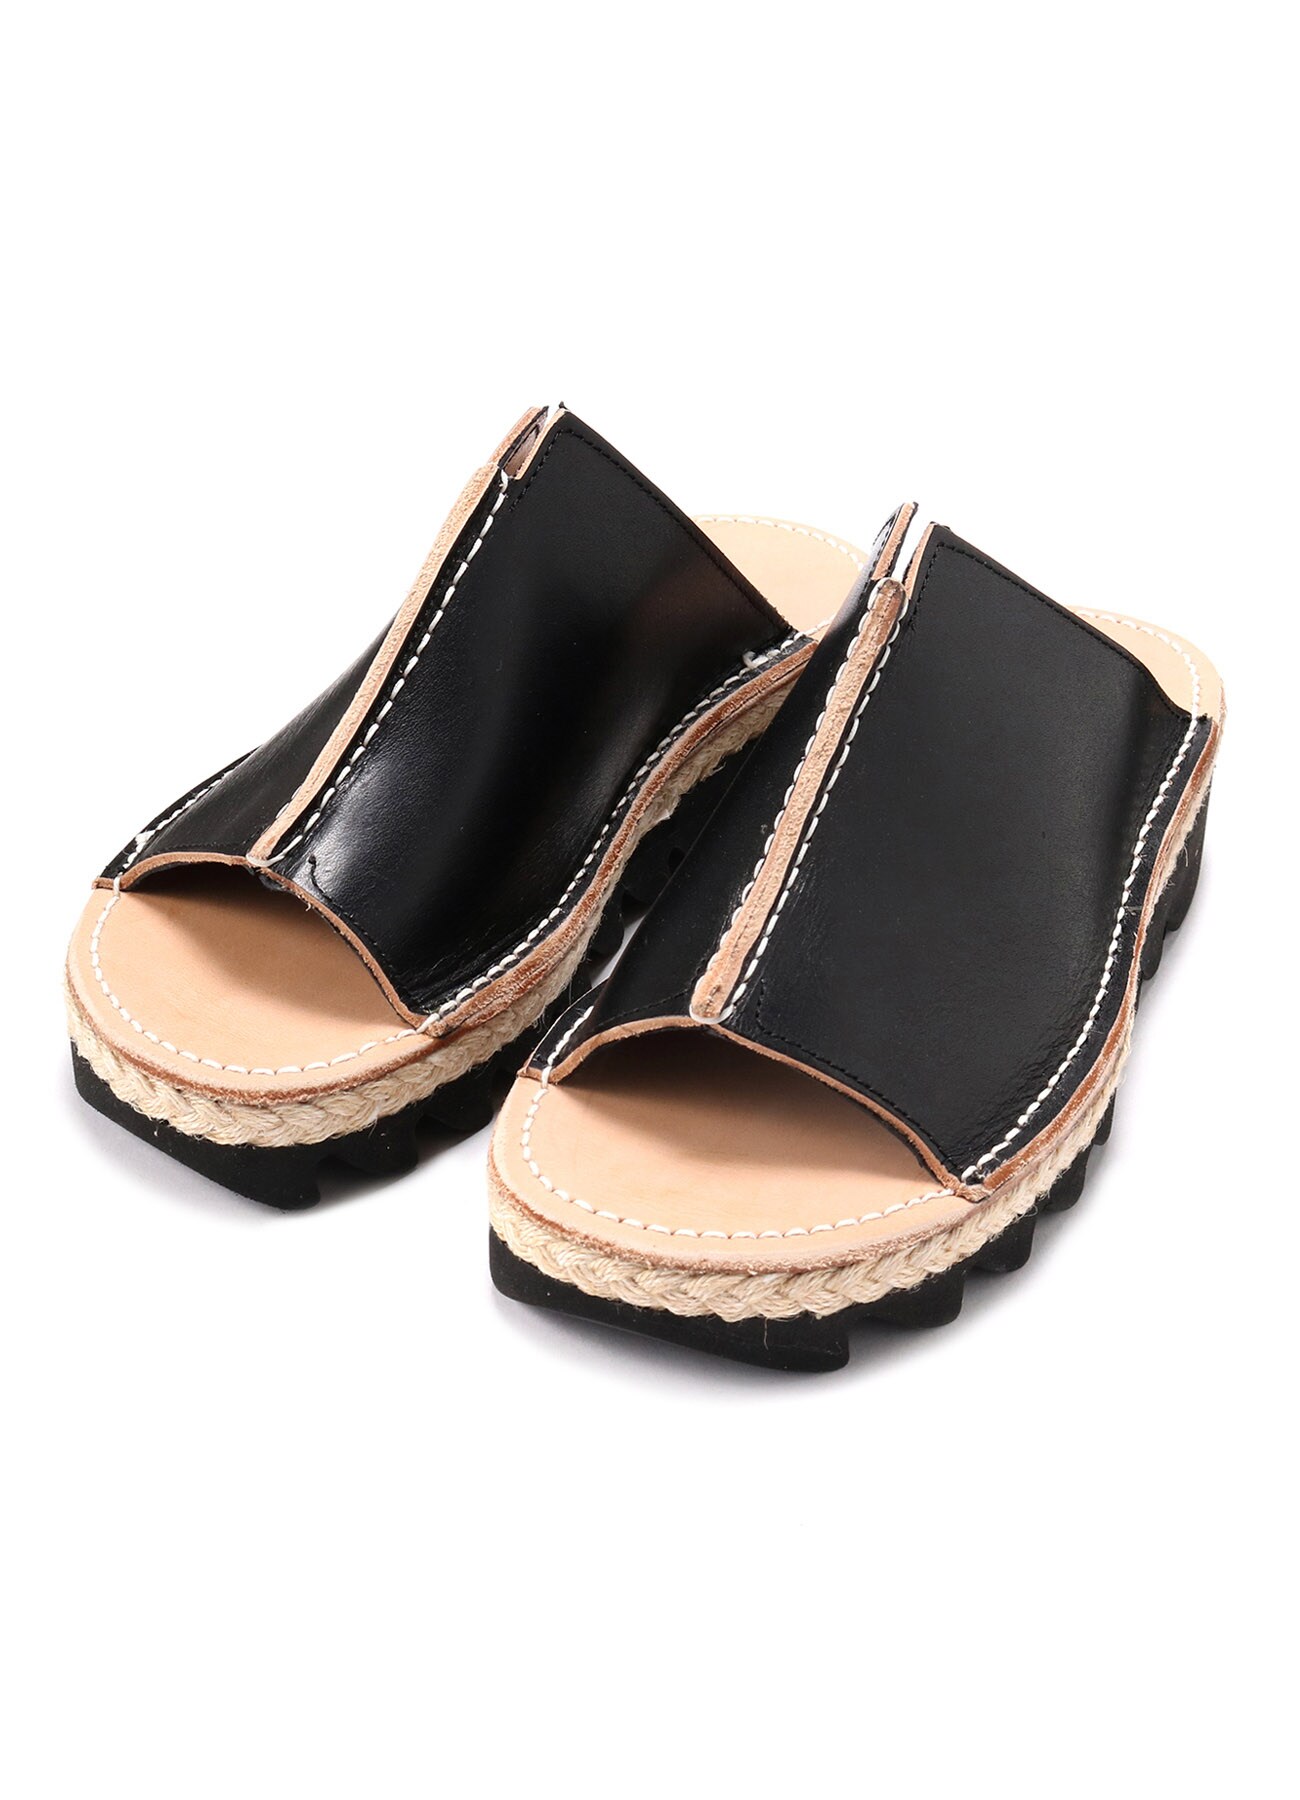 THICH NUME LEATHER B CENTER CONNECTED SANDALS